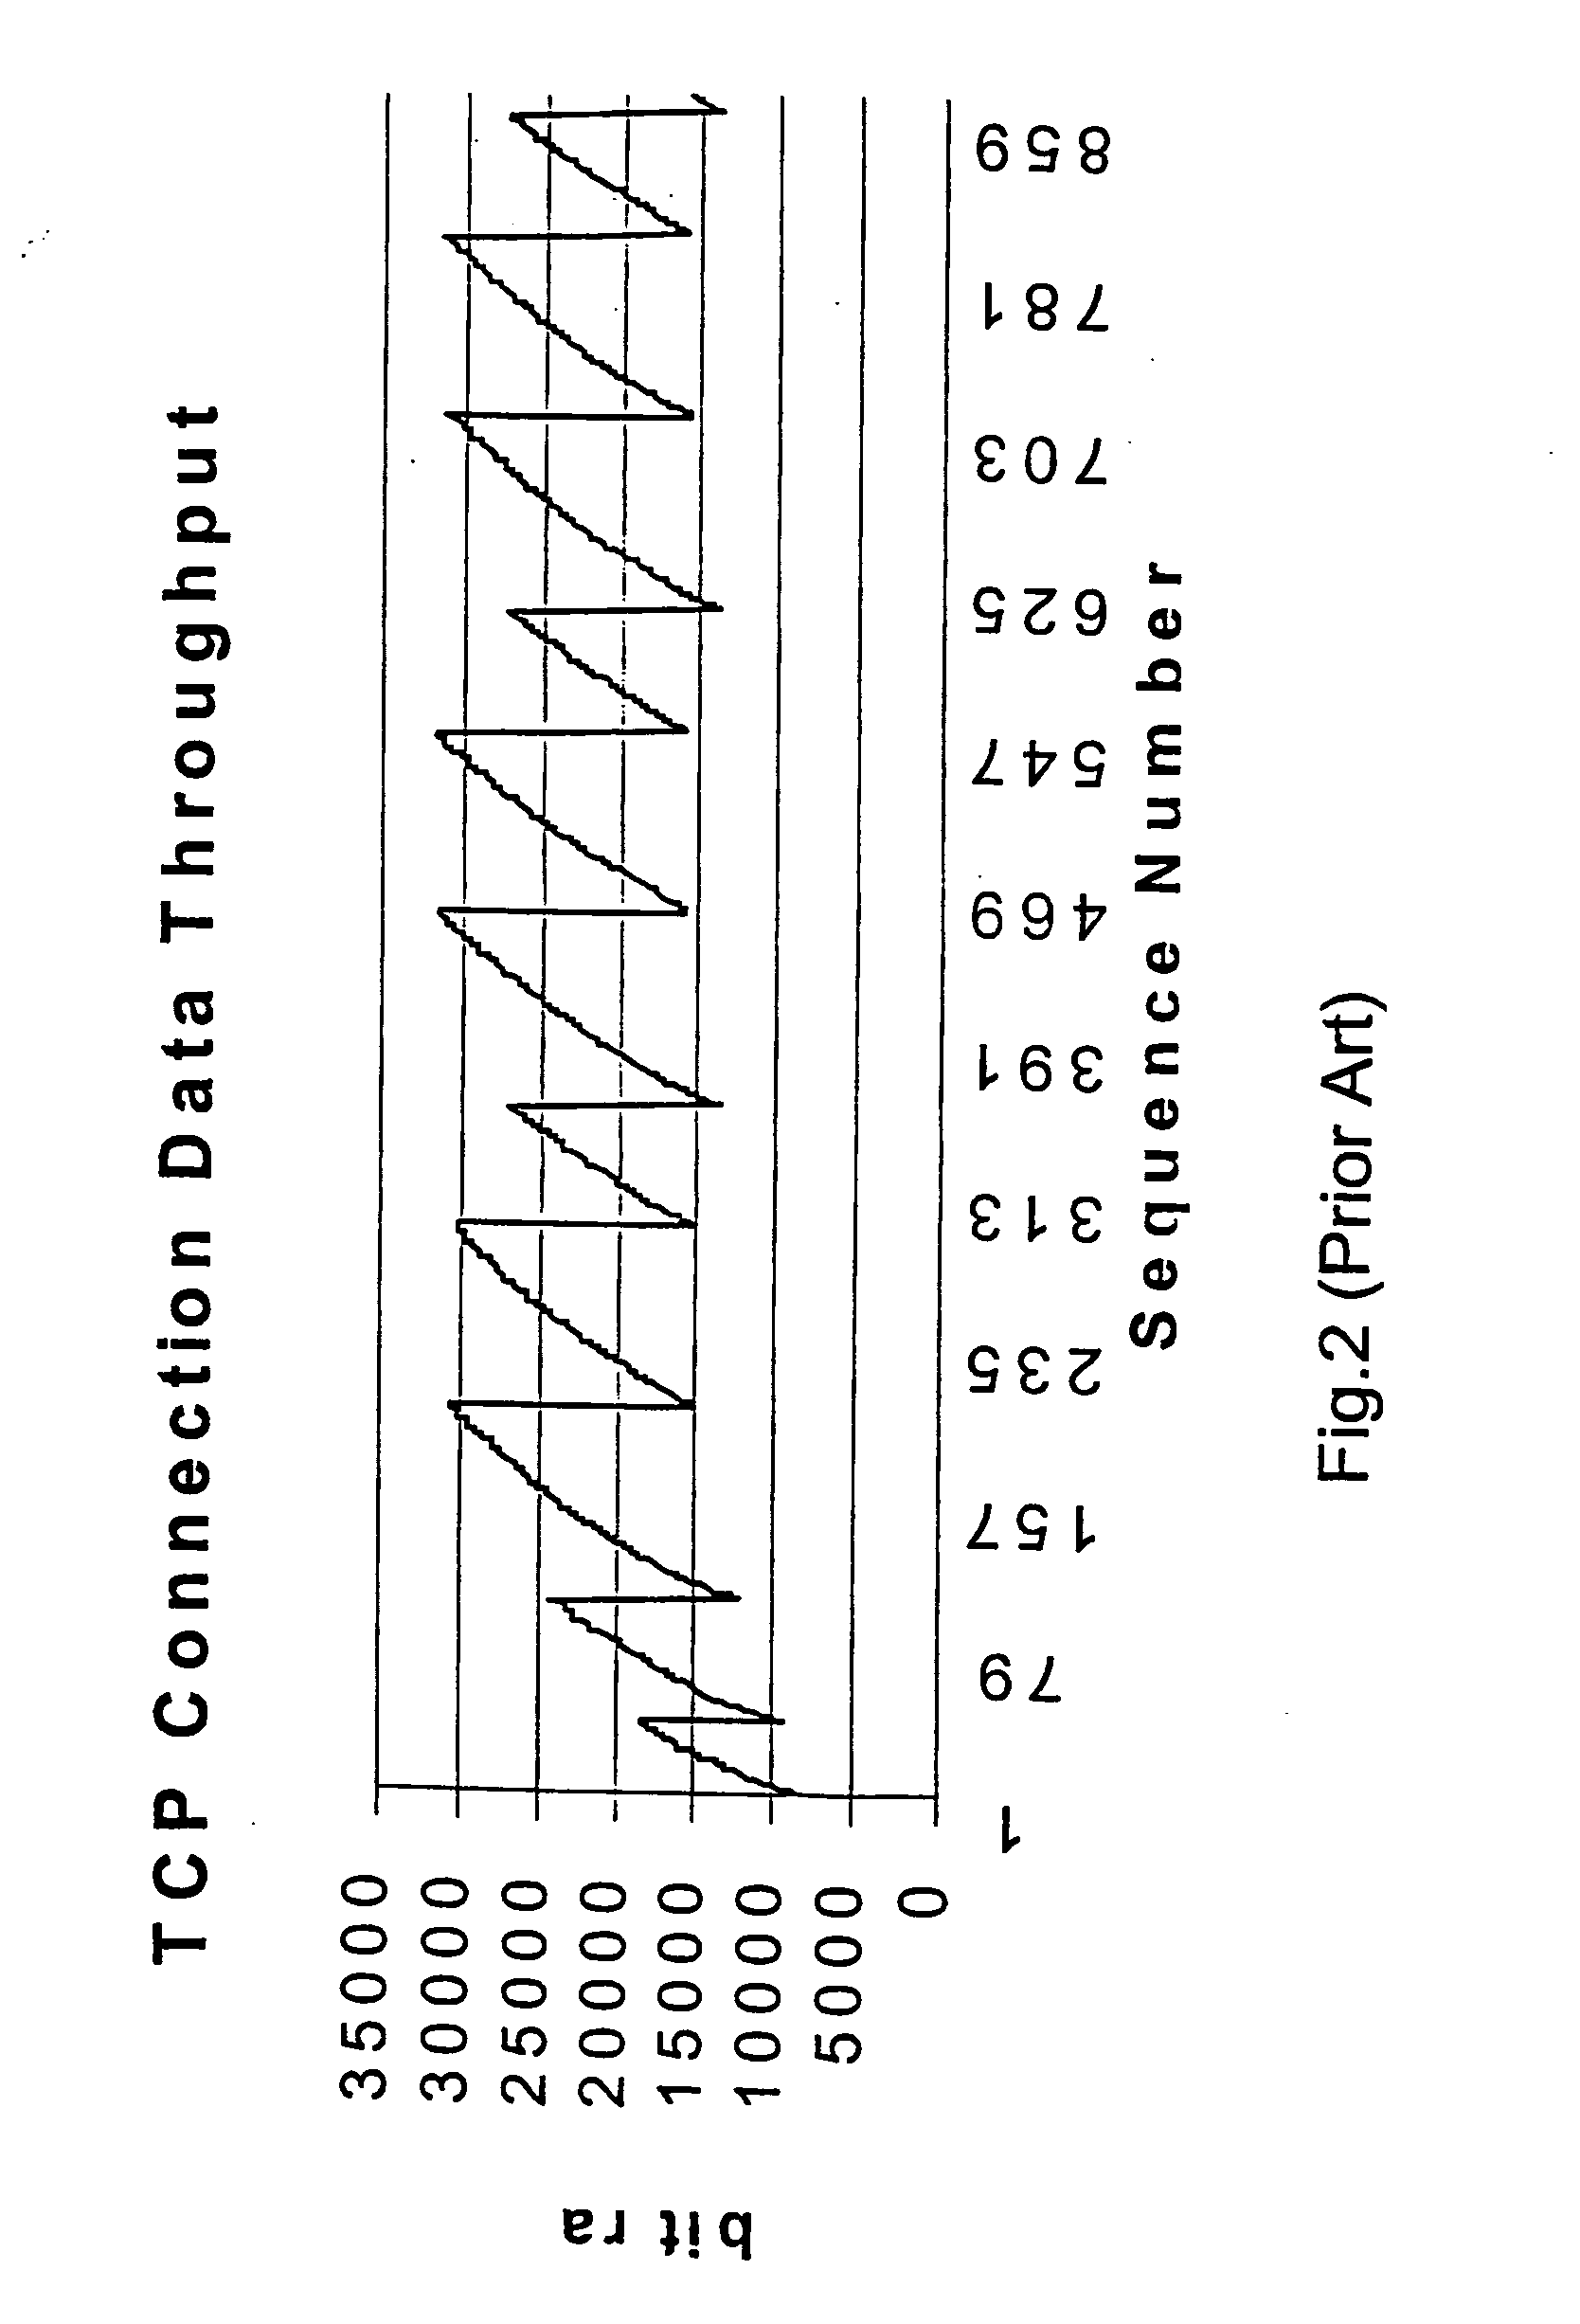 Data communications method and system using buffer size to calculate transmission rate for congestion control